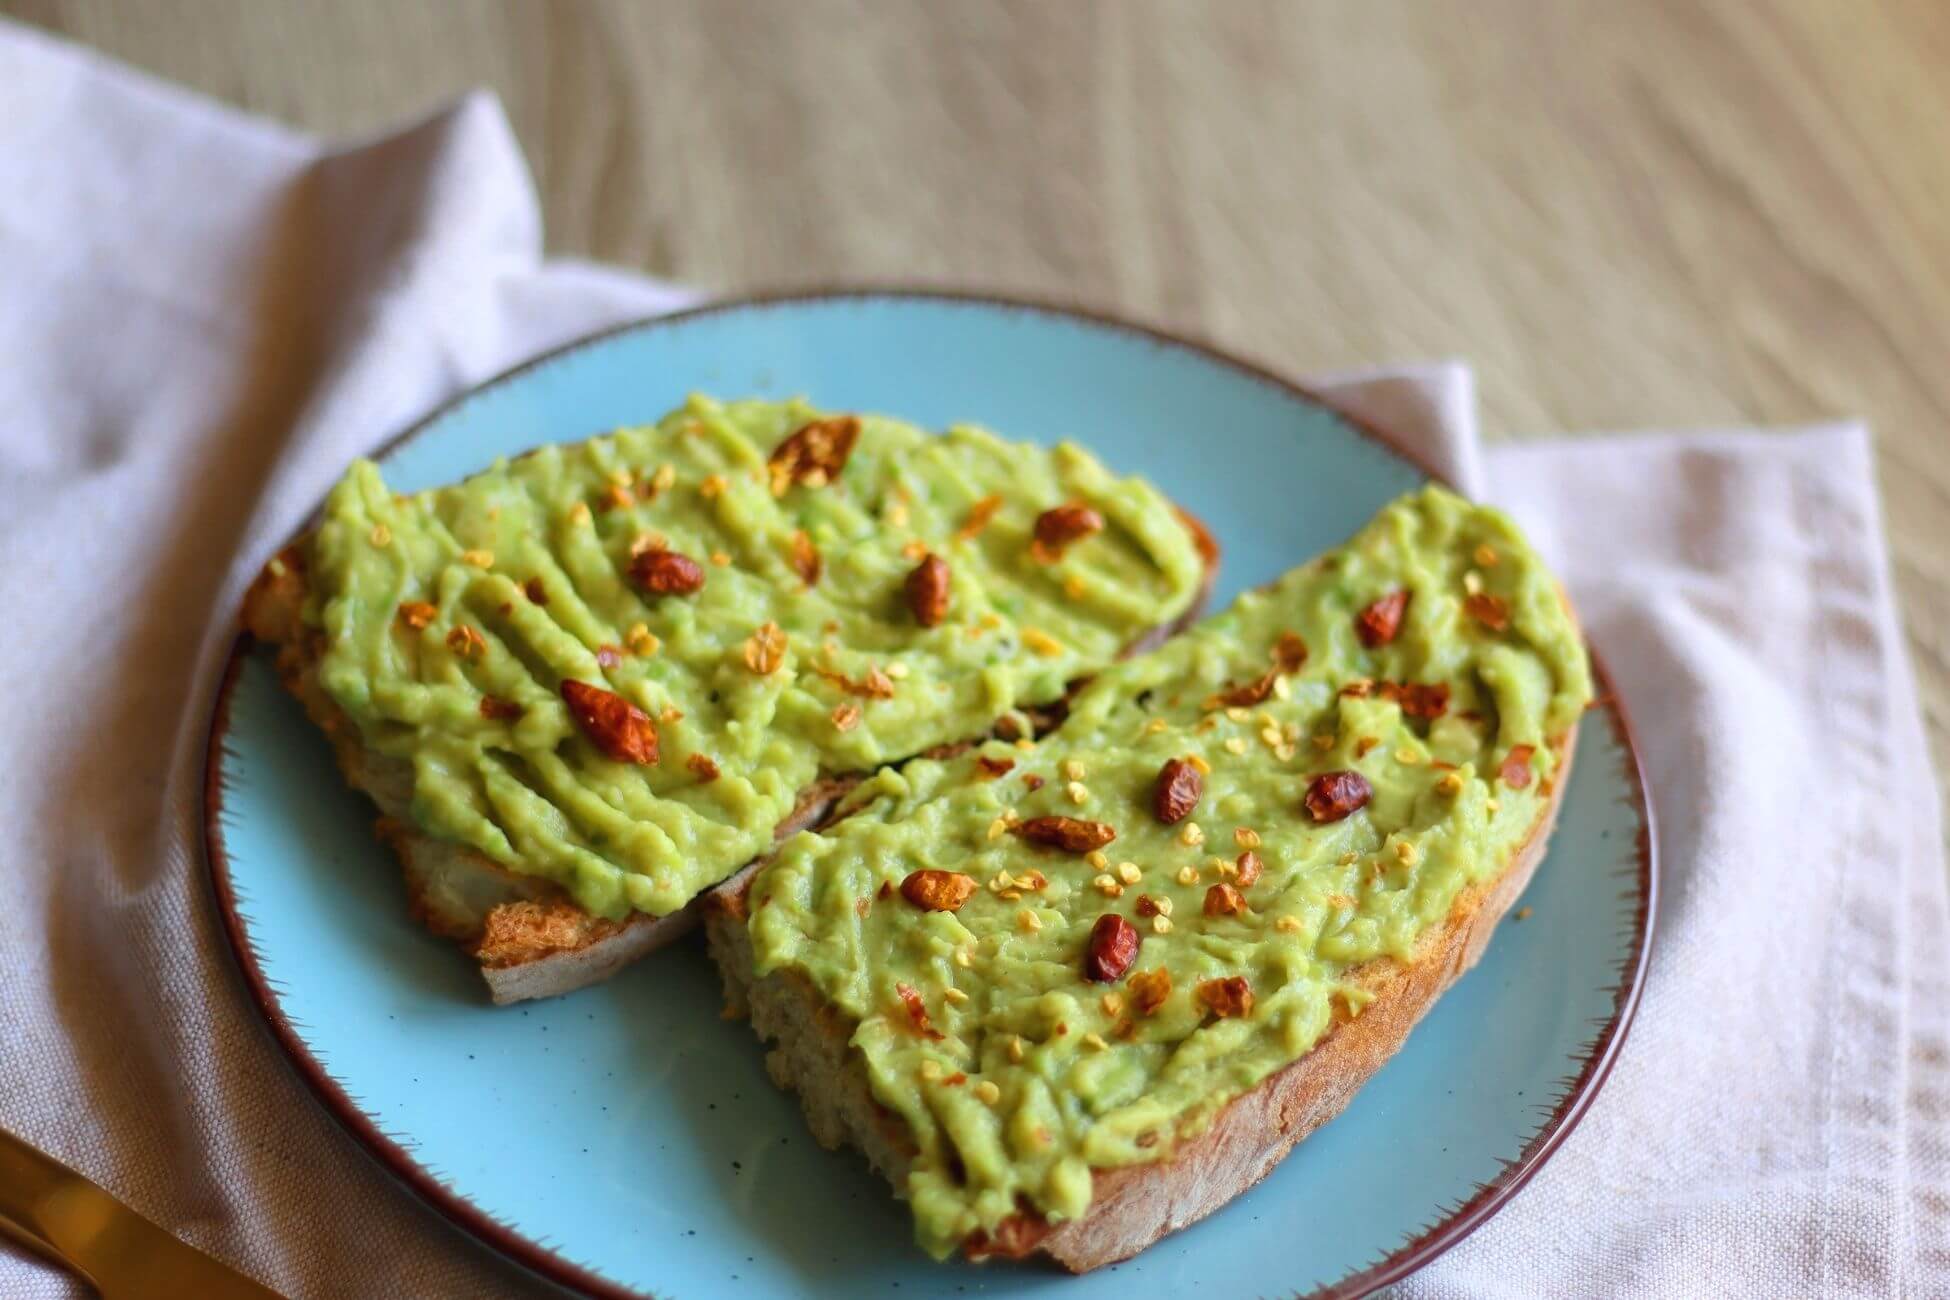 A light blue plate holds two slices of avocado bread topped with mashed avocado, garnished with red chili flakes. 